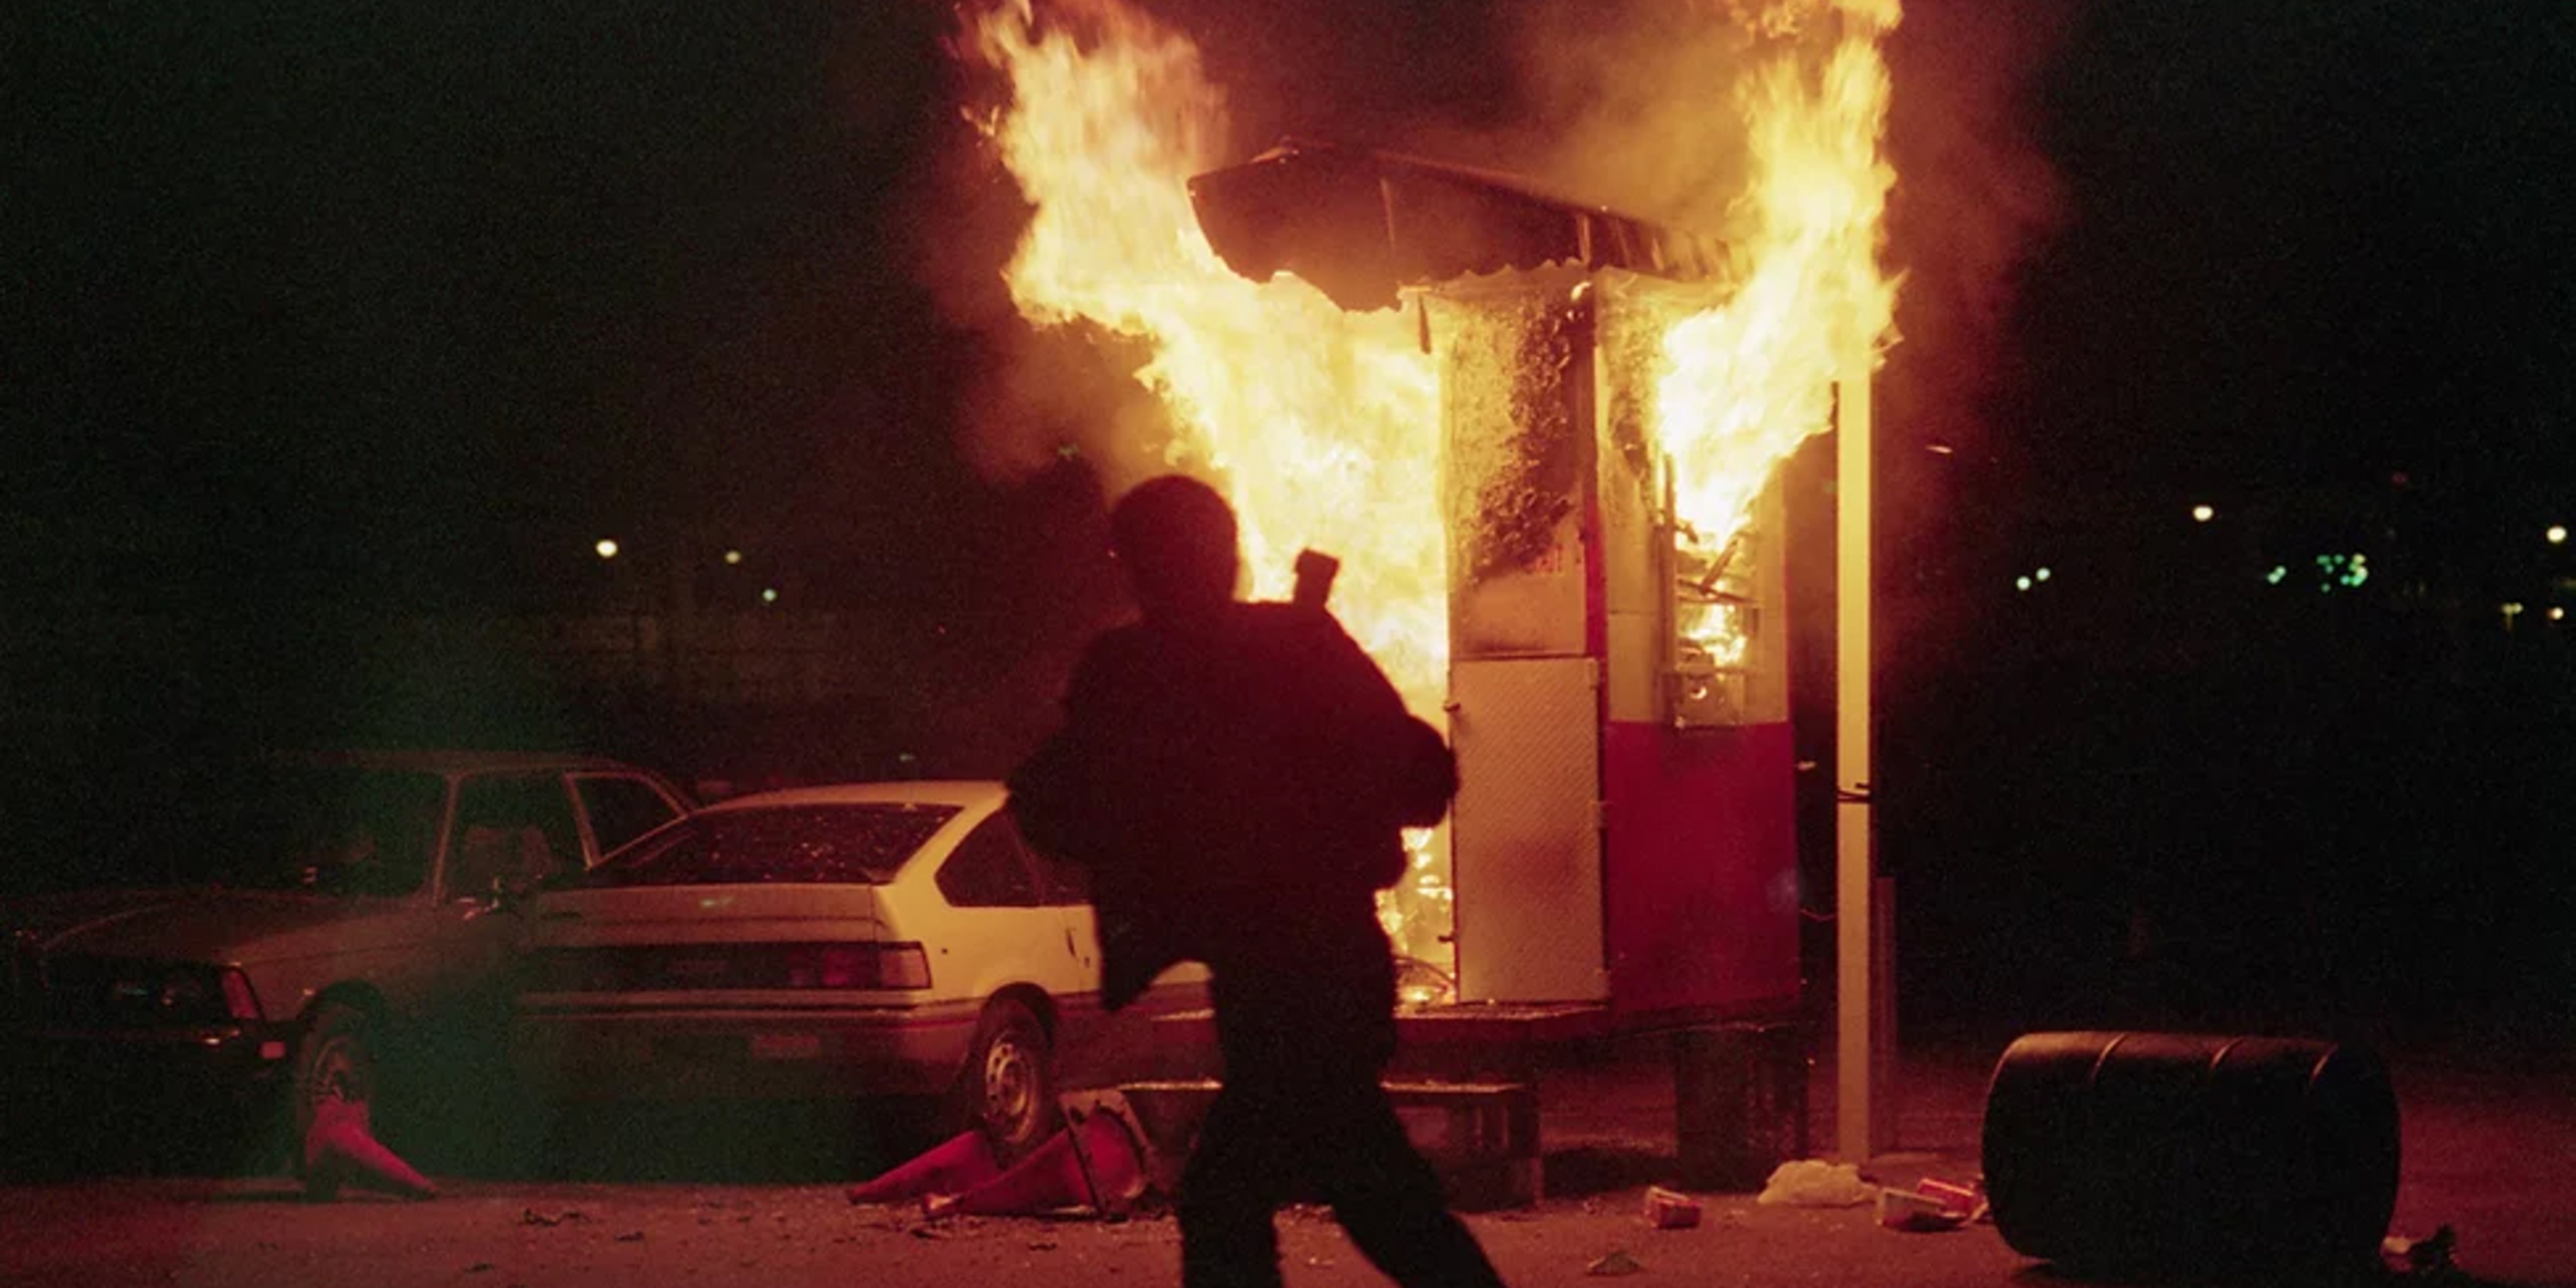 man running near a burning building - Photo by Bettmann Collection/Getty Images